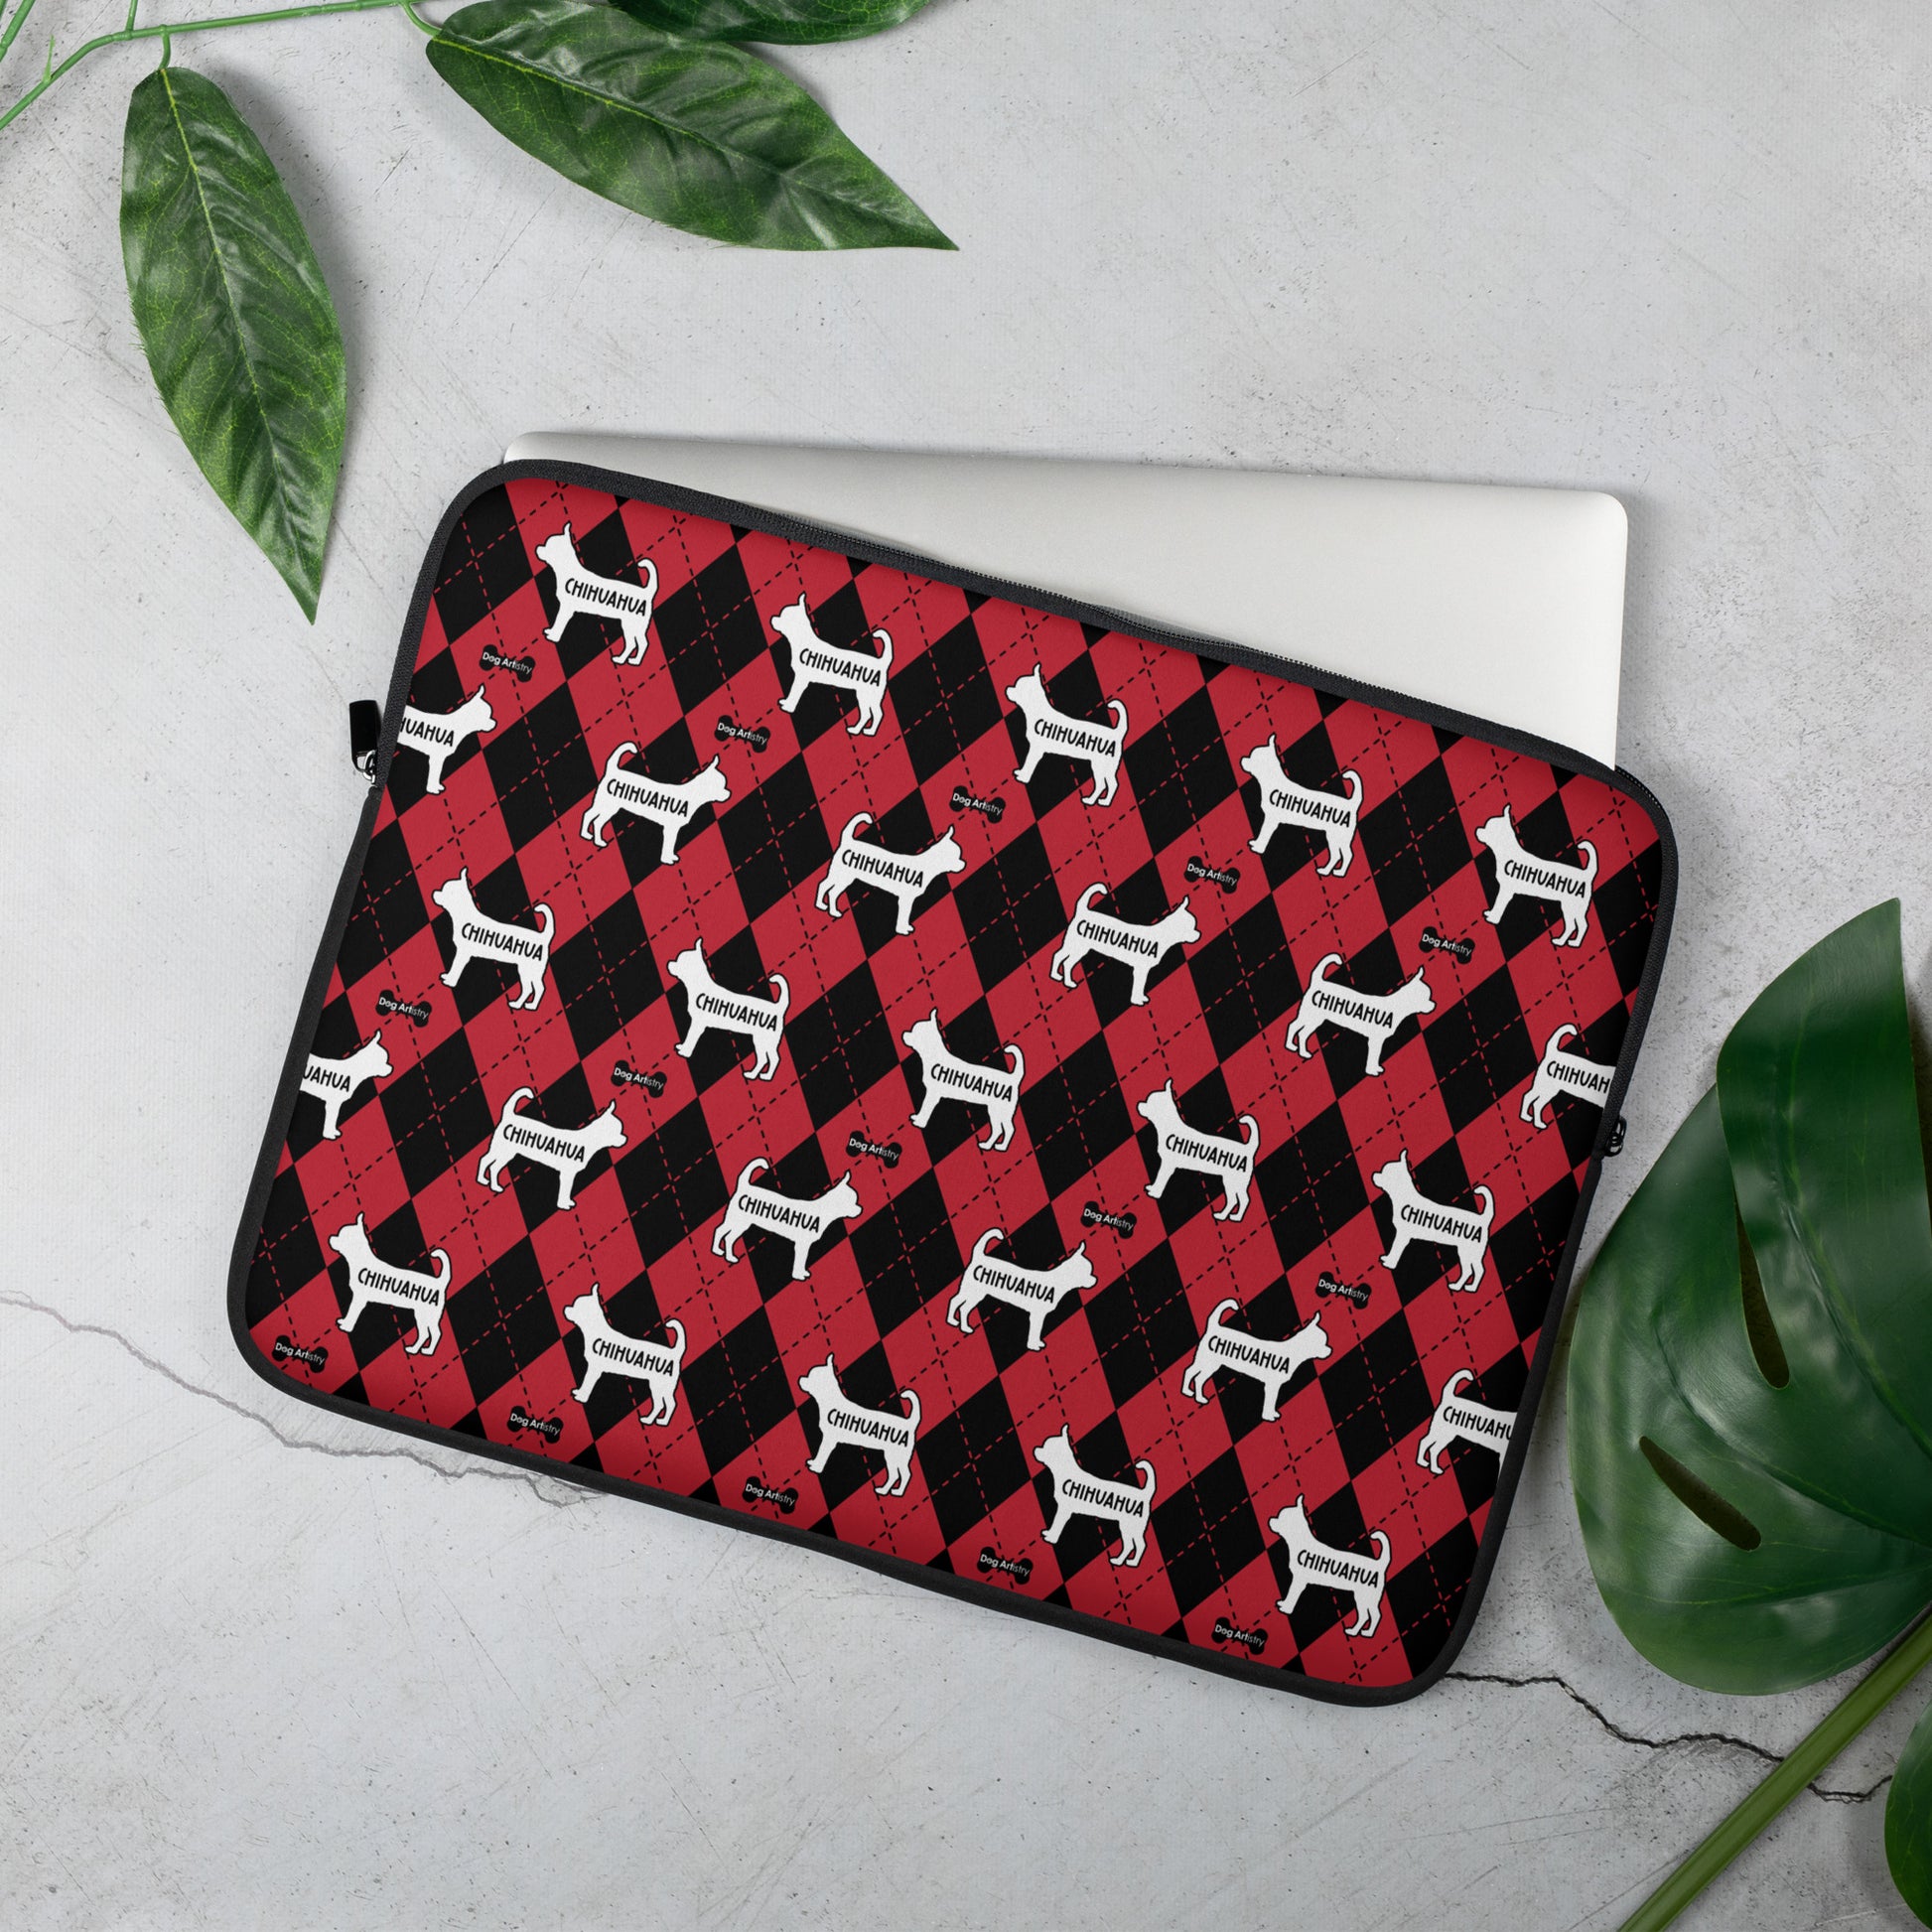 Chihuahua red and black argyle laptop sleeve by Dog Artistry